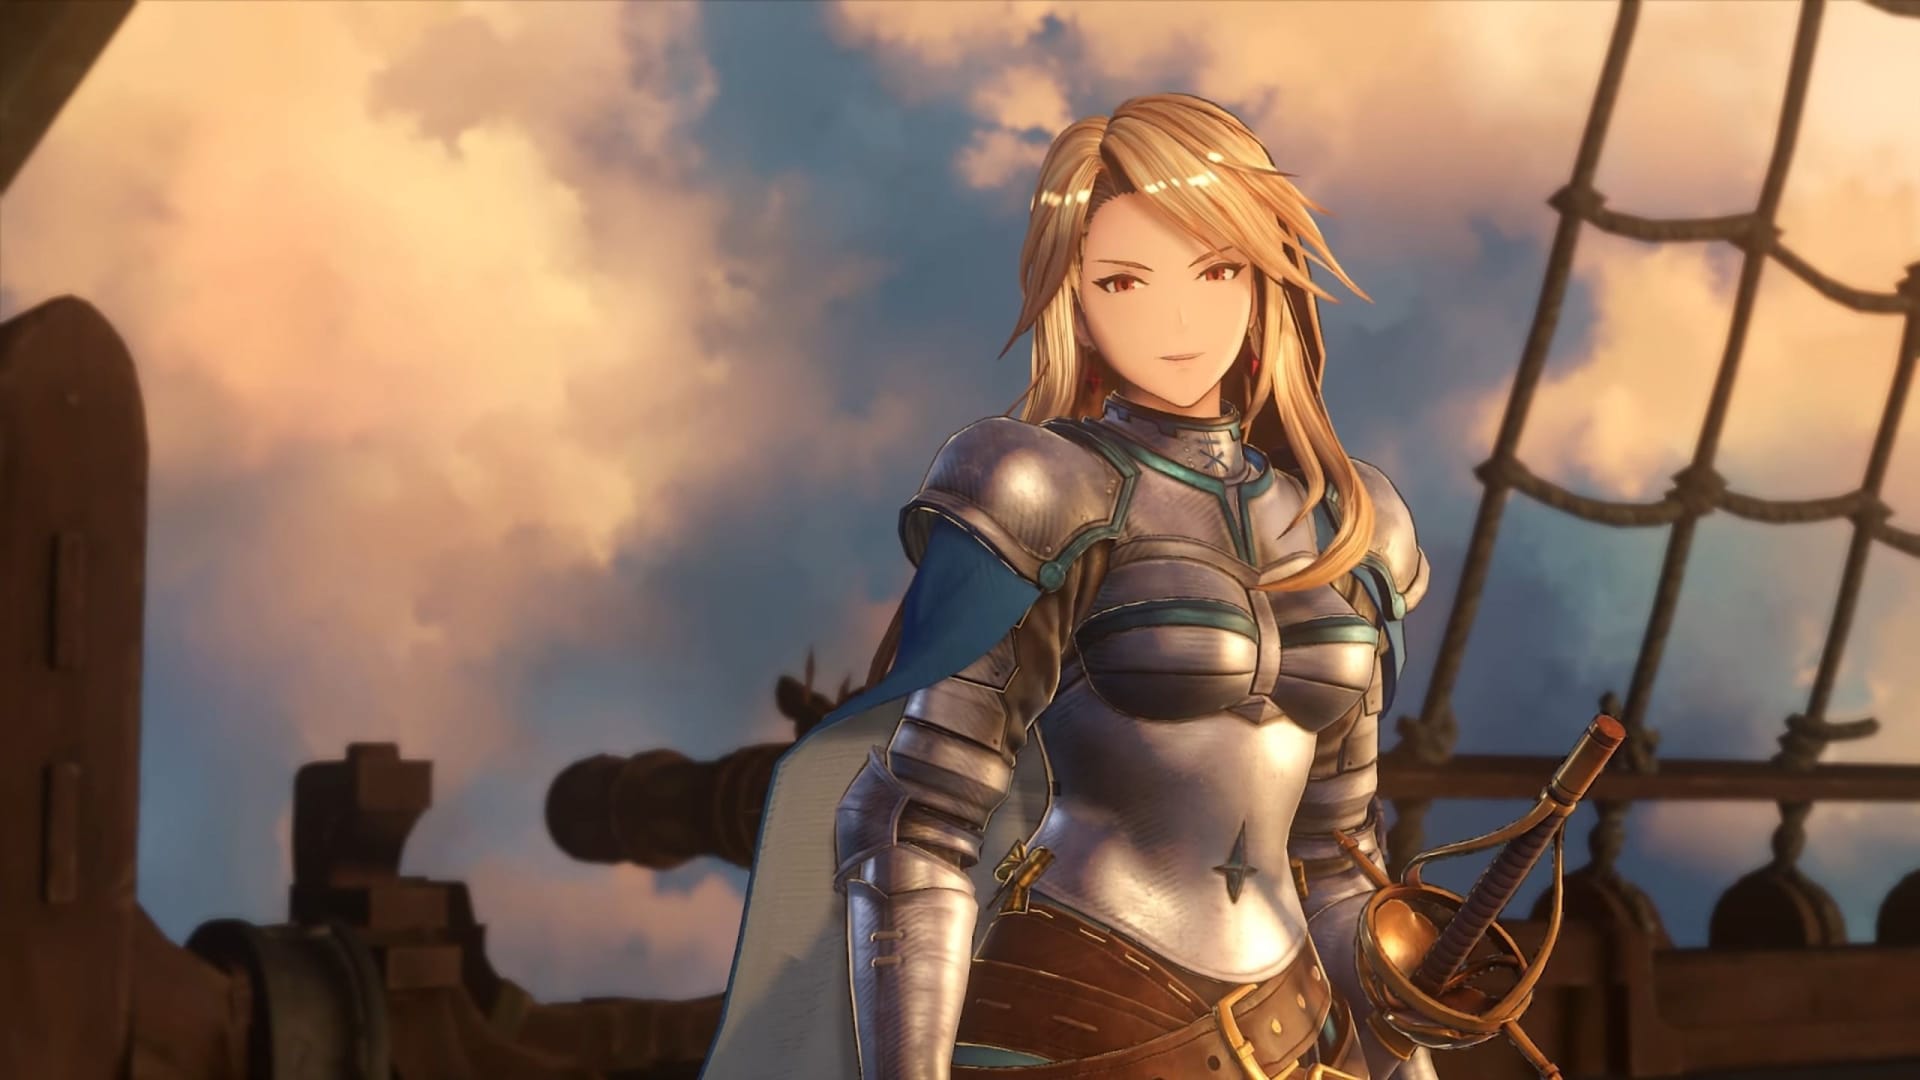 GranBlue Fantasy: Project Re:Link